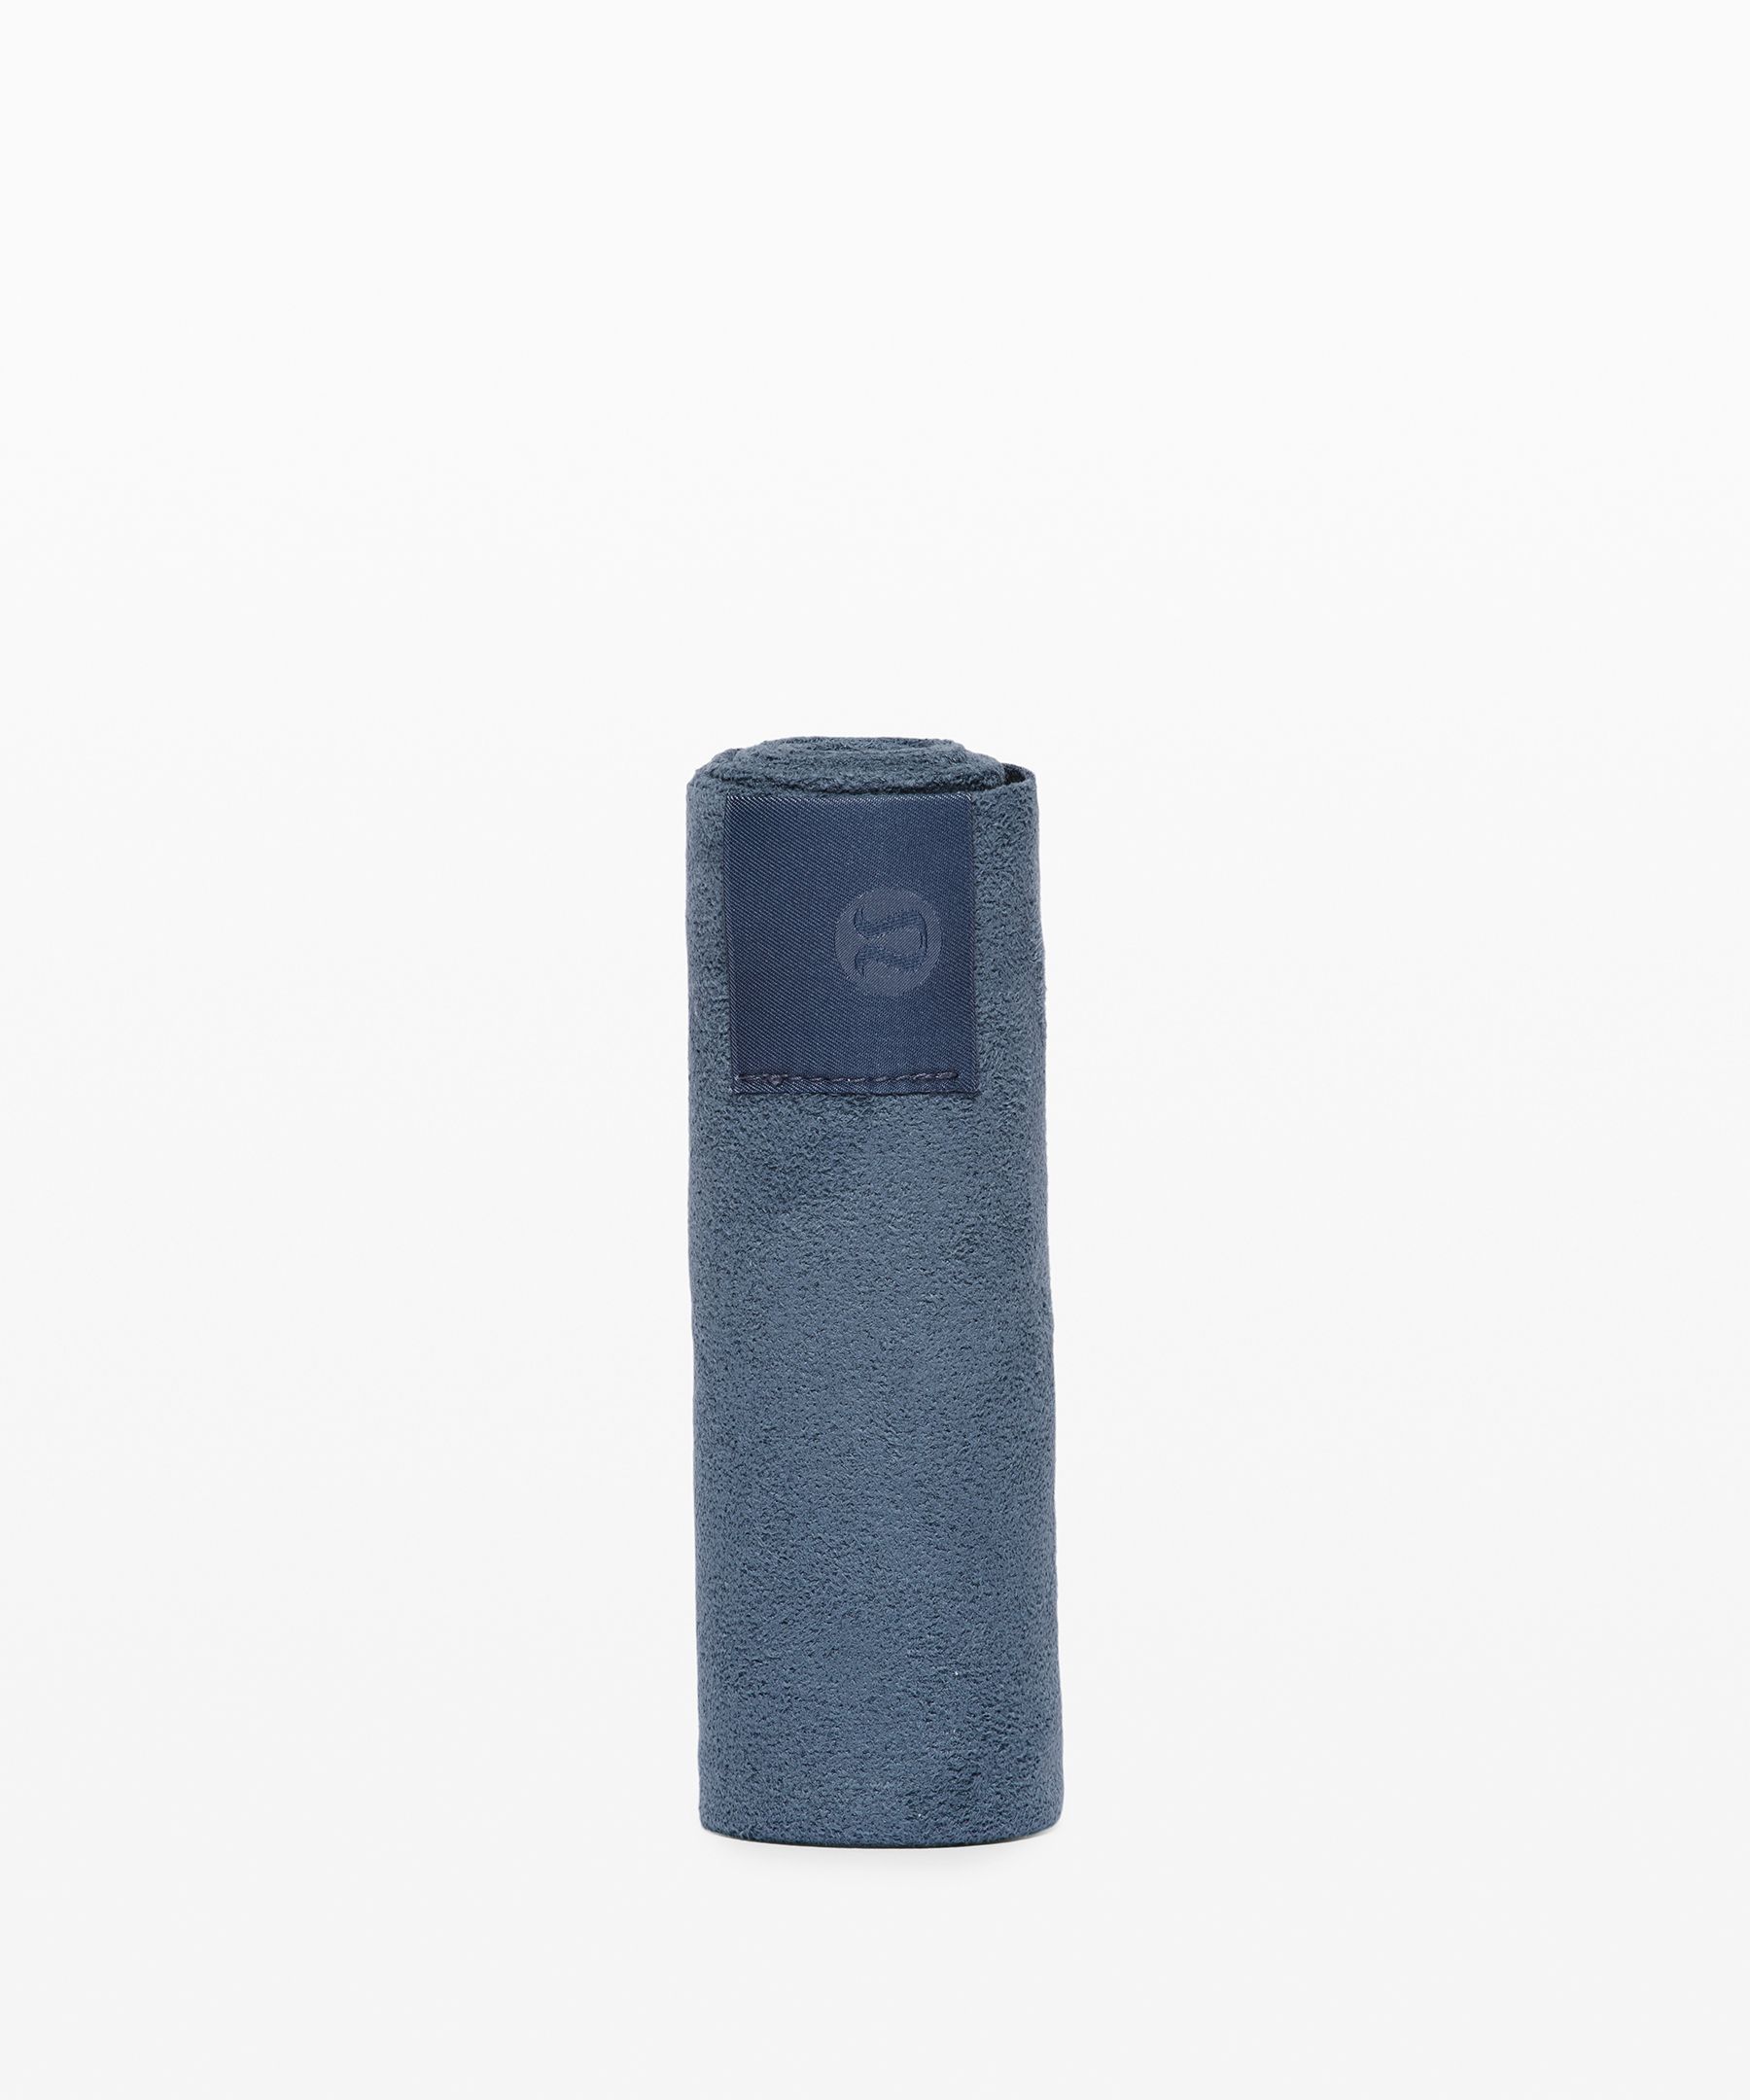 Lululemon The (small) Towel In Navy